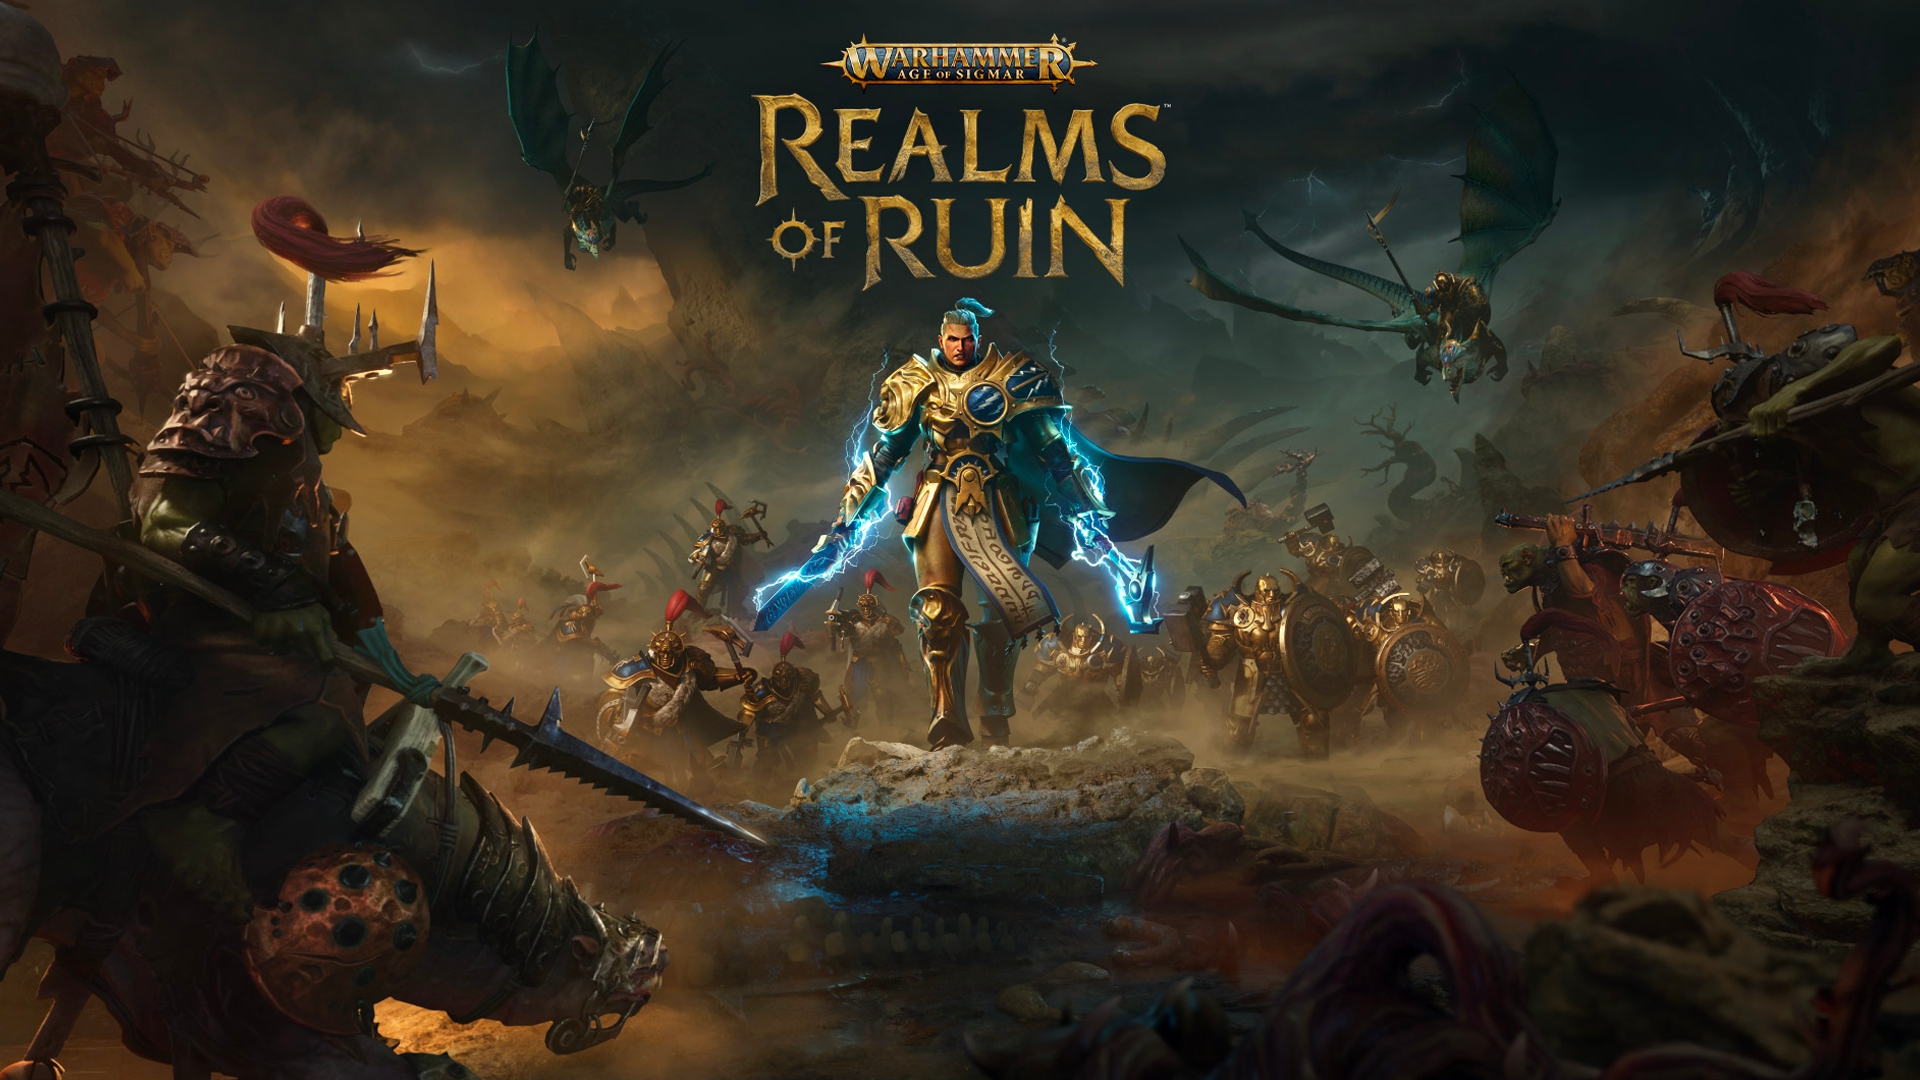 https://gaming-cdn.com/images/products/14228/orig/warhammer-age-of-sigmar-realms-of-ruin-pc-game-steam-cover.jpg?v=1701180233